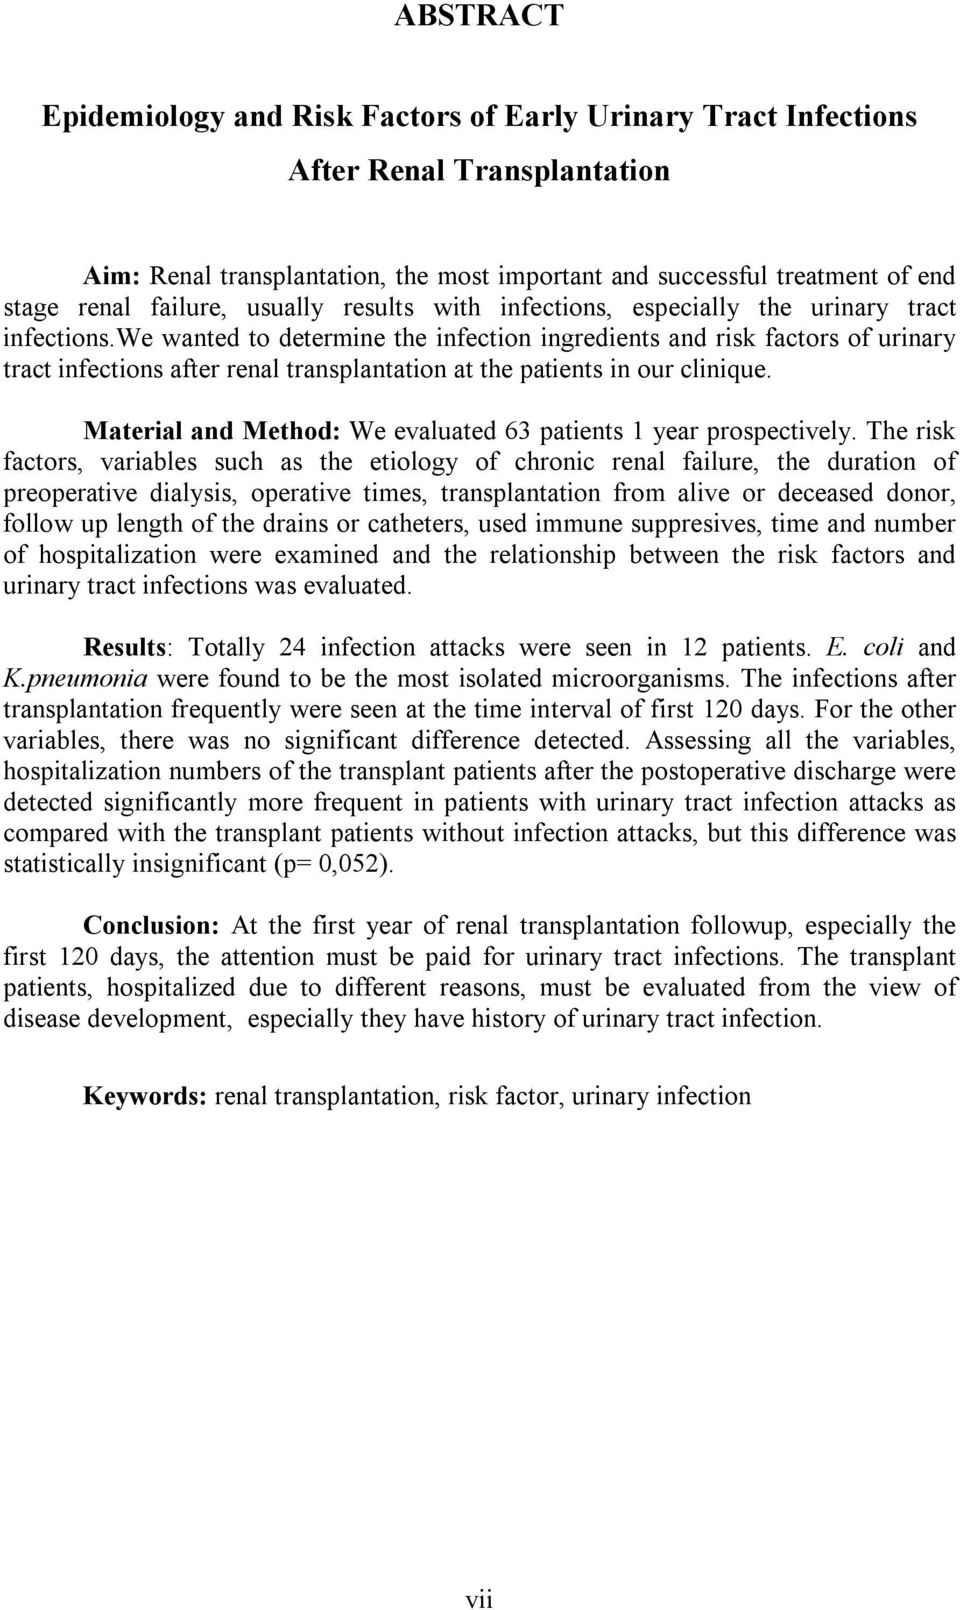 we wanted to determine the infection ingredients and risk factors of urinary tract infections after renal transplantation at the patients in our clinique.